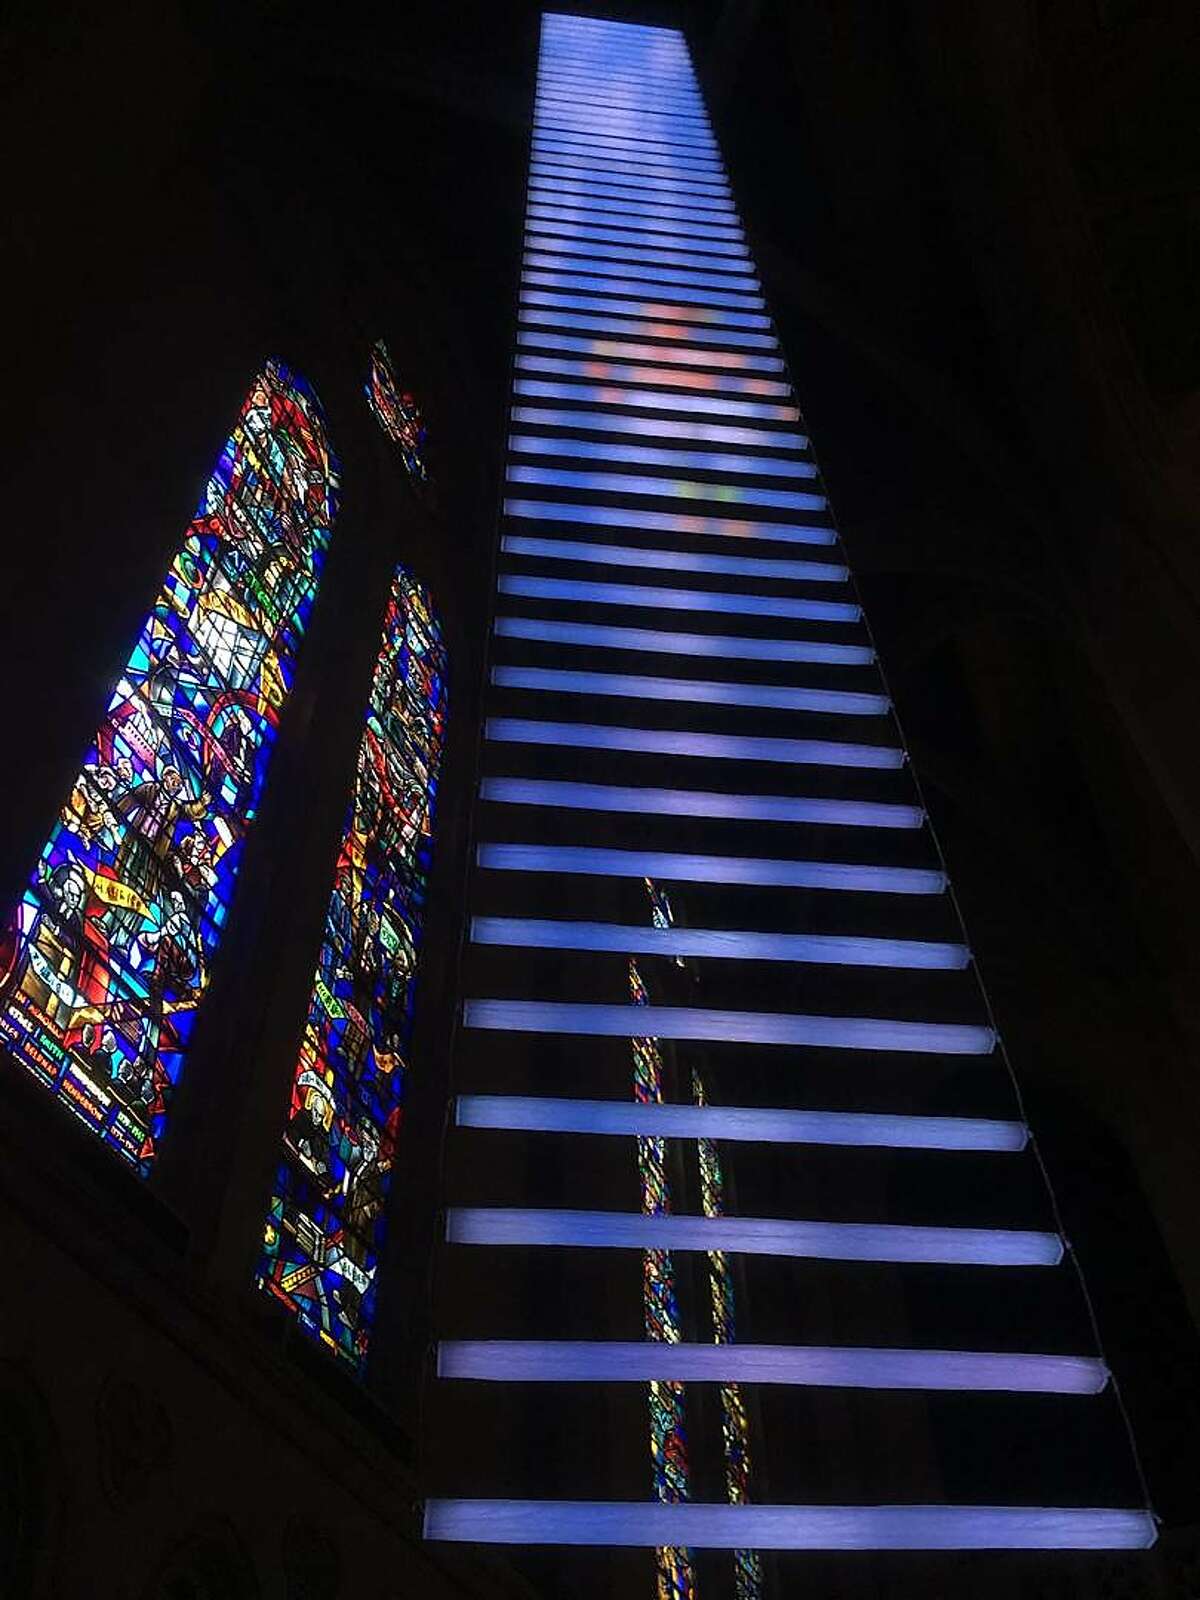 Jim Campbell and�Benjamin Bergery,��Jacob�s Dream: A Luminous Path,� a site-specific installation at Grace Cathedral